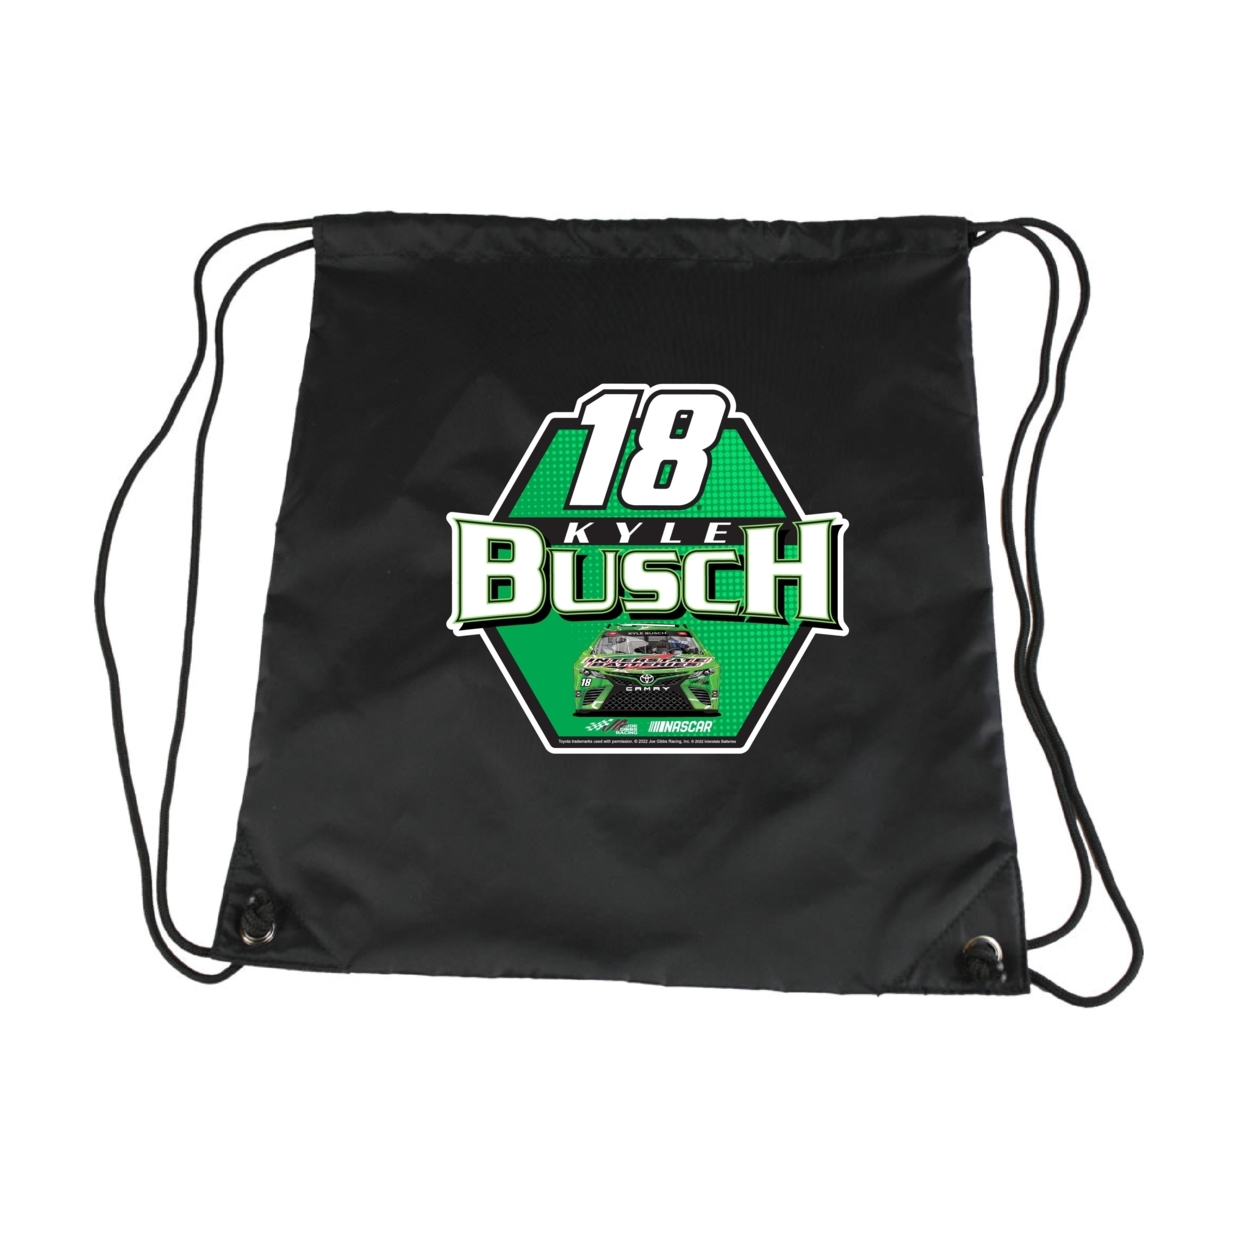 Kyle Busch Nascar Cinch Bag With Drawstring New For 2022